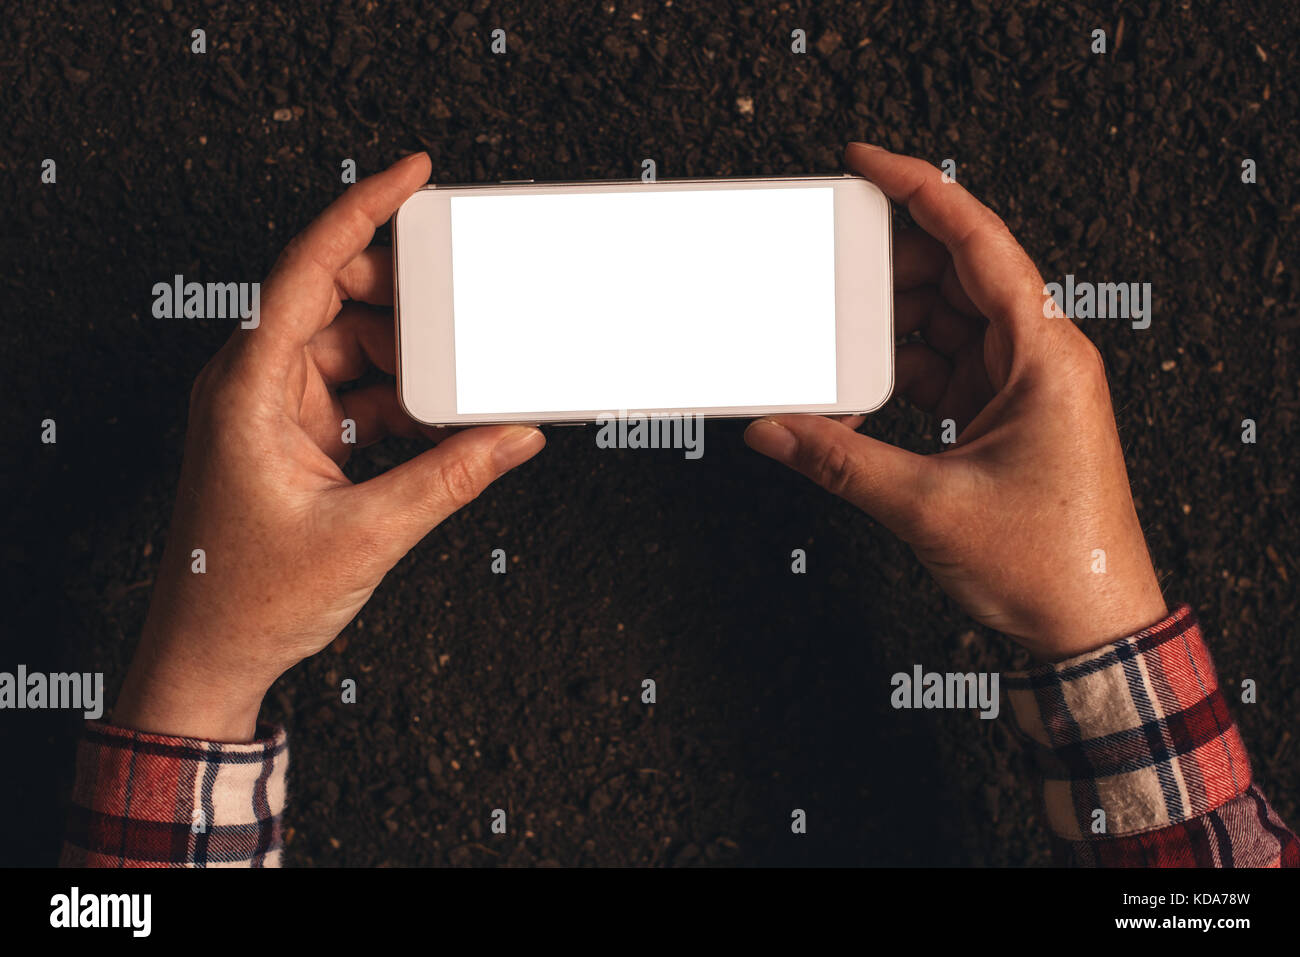 Farmer holding mobile phone over soil ground. Smart phone has blank touch screen as copy space. Stock Photo